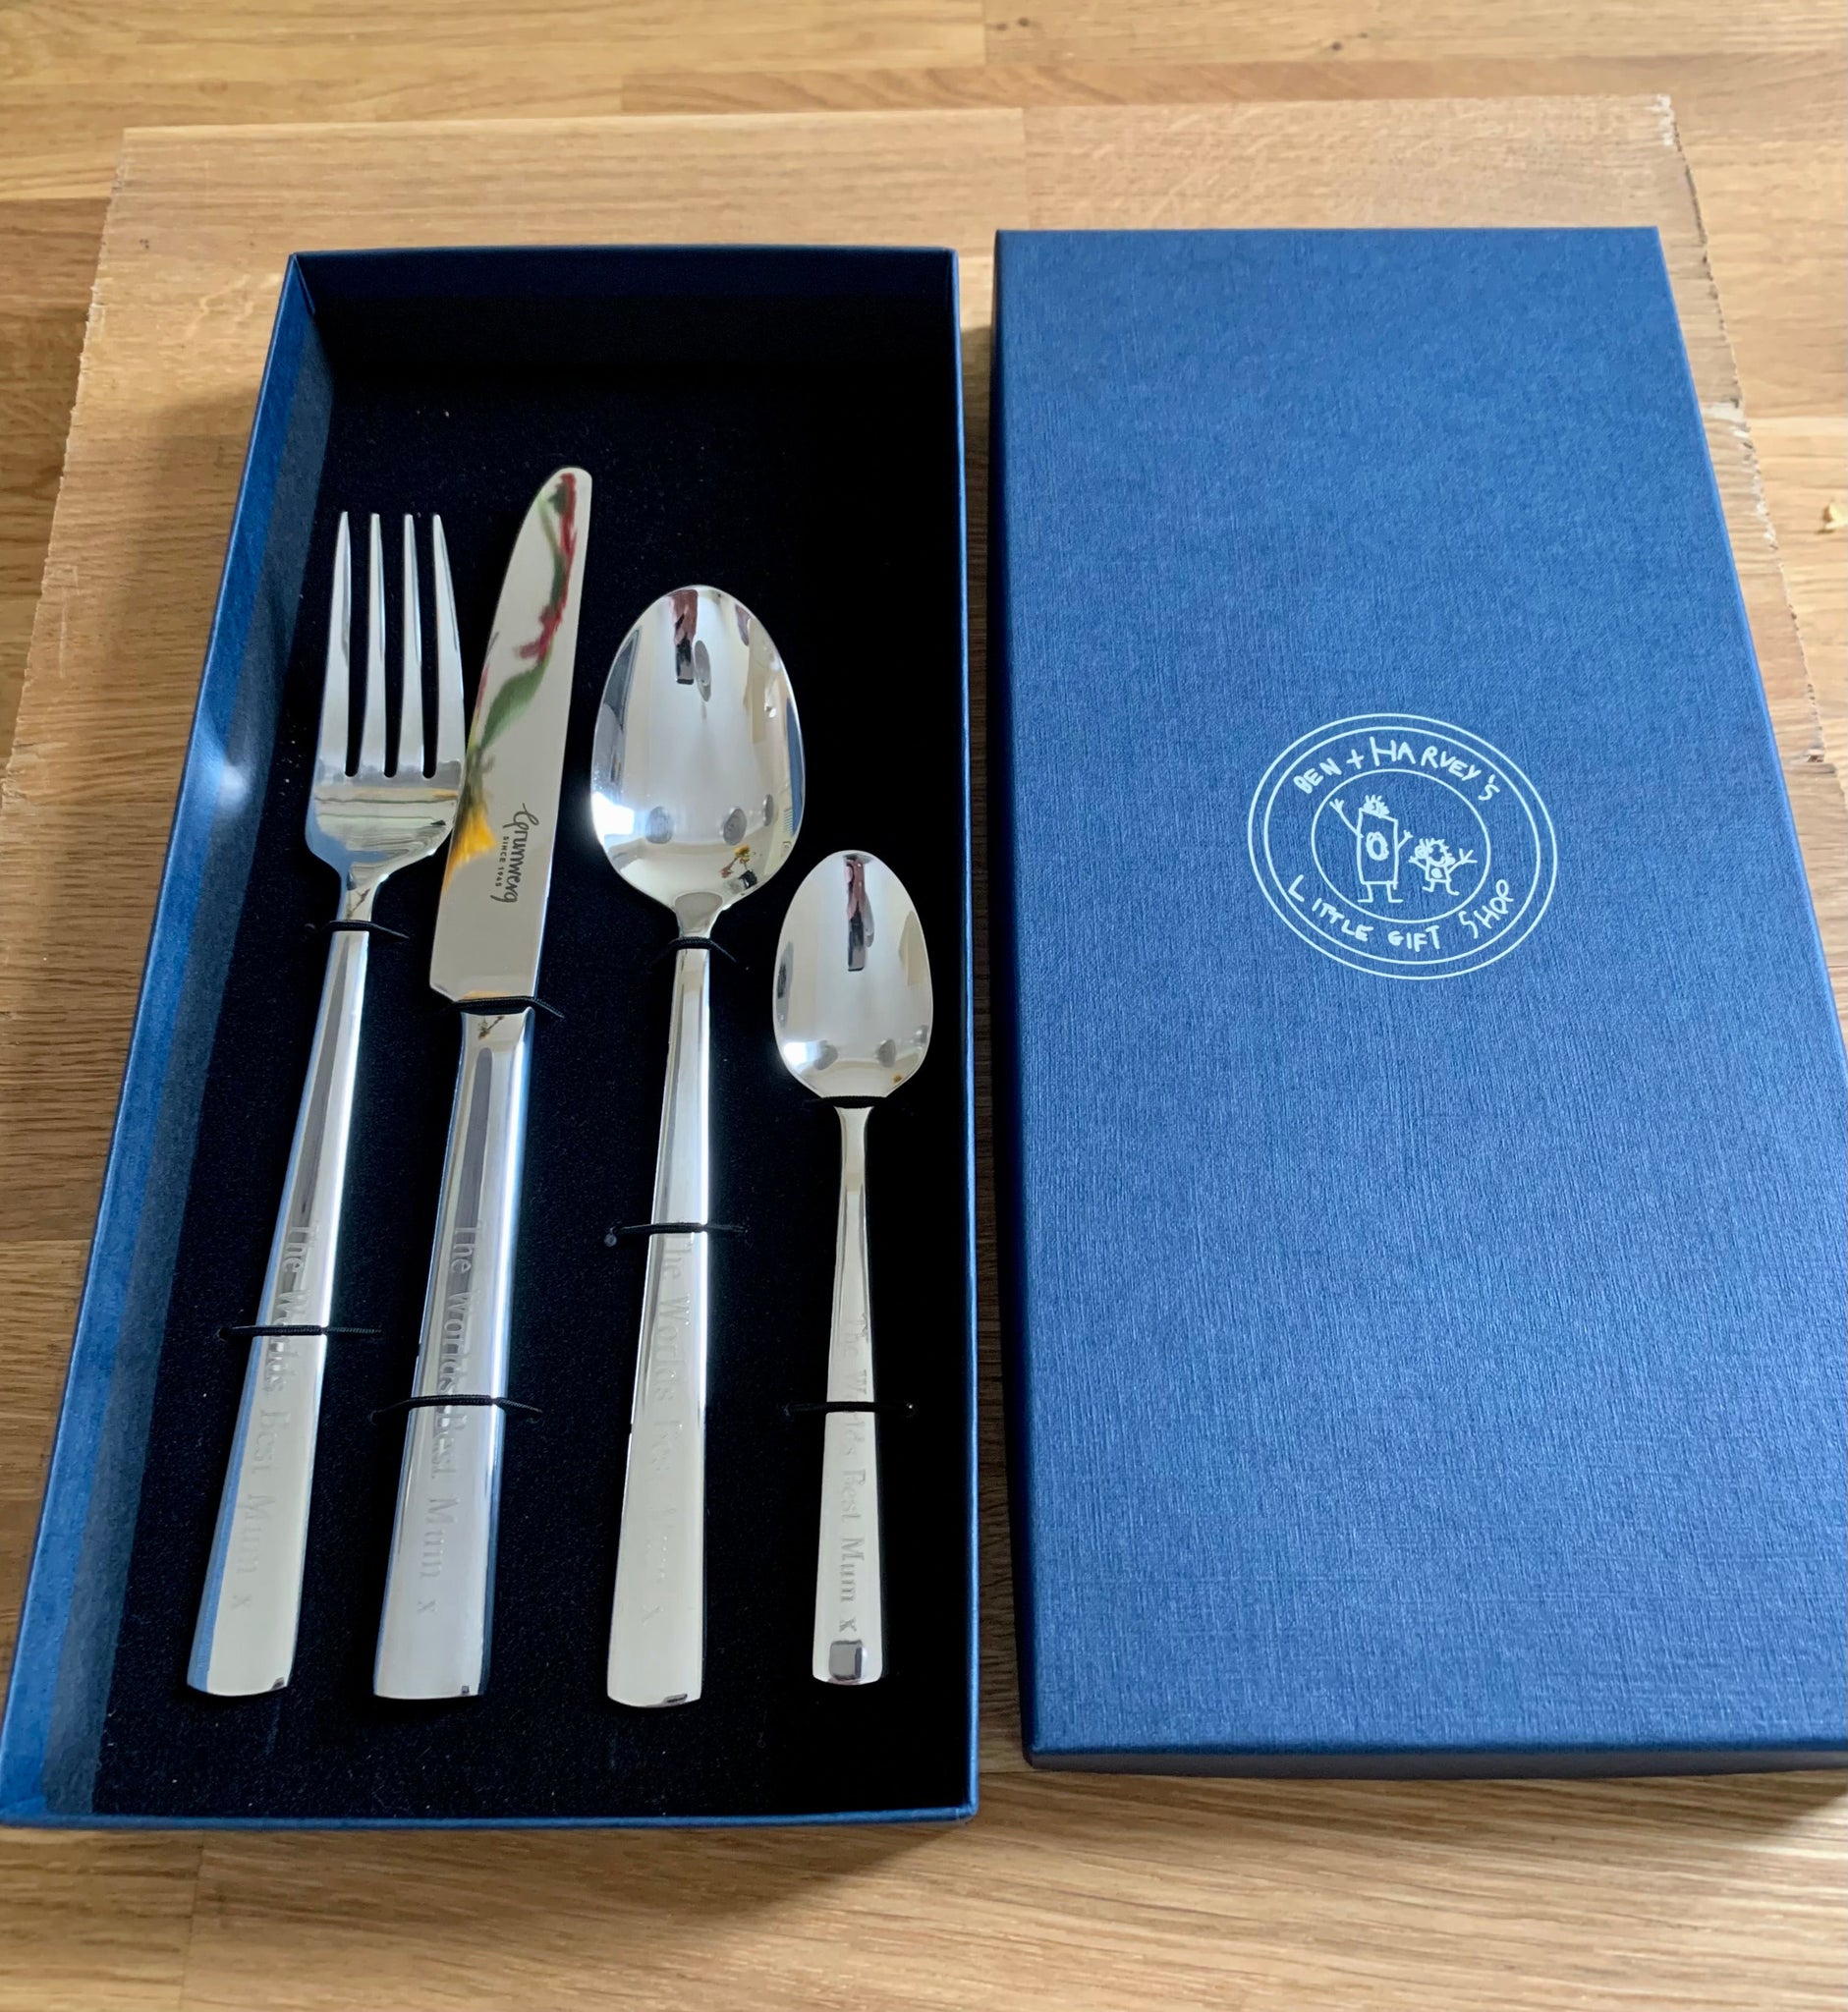 Viners Personalised Engraved Adults 4 Piece Cutlery Set With Bespoke Presentation Box